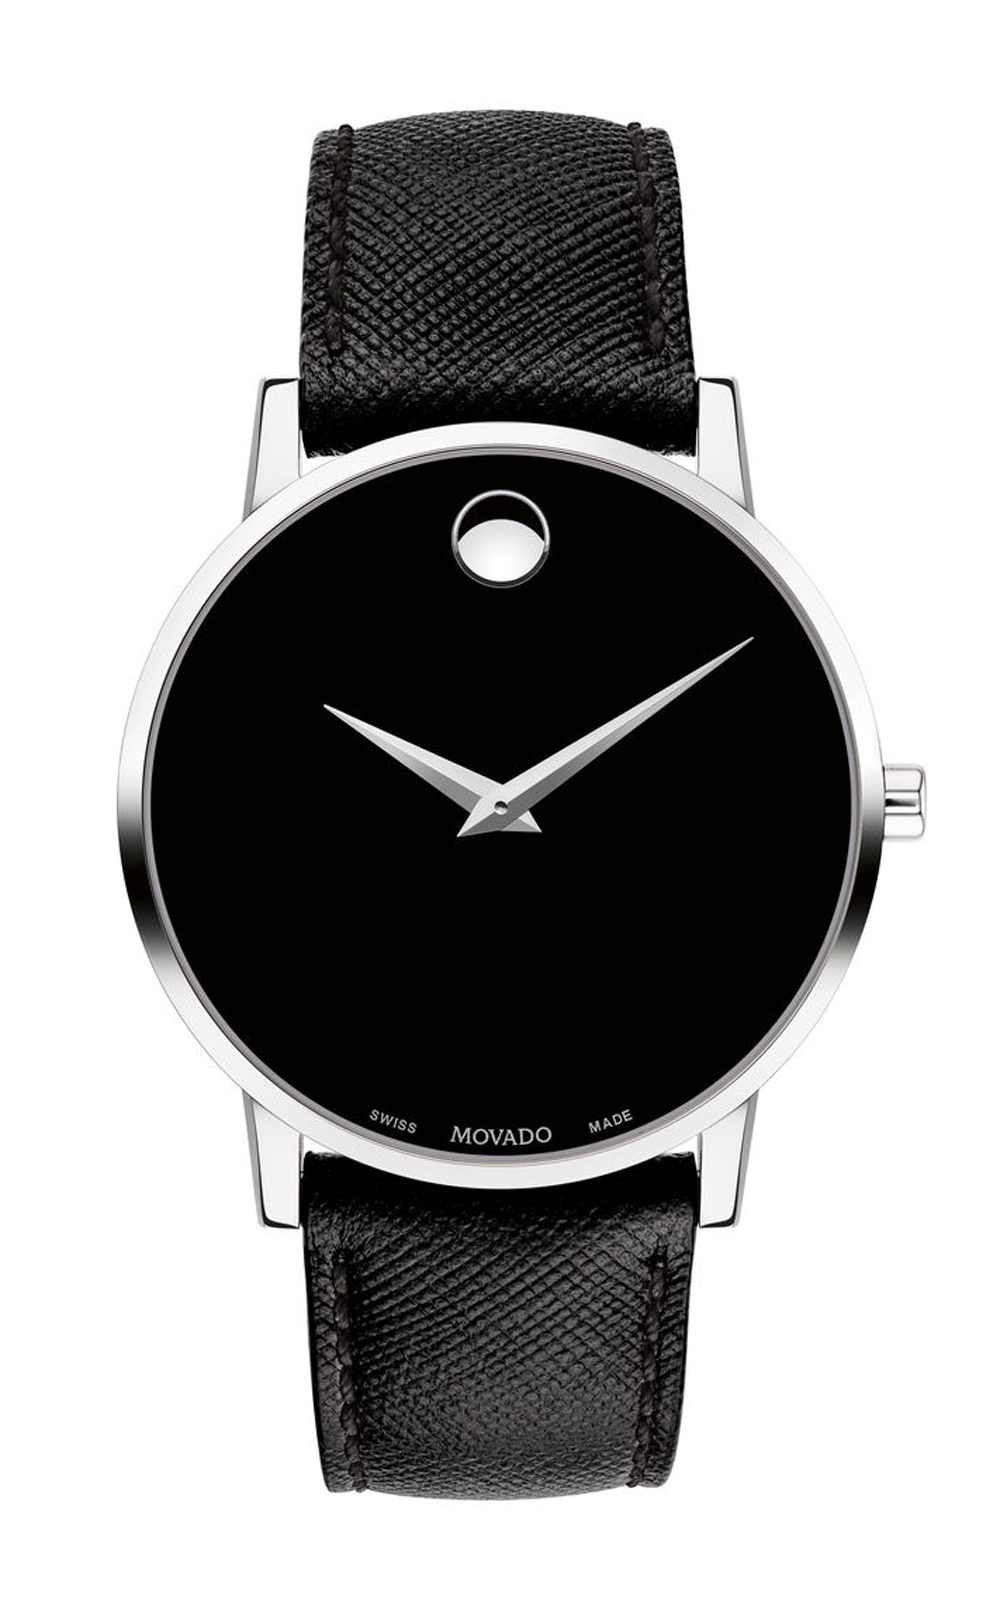 Đồng hồ Movado Museum Classic 0607194, 40mm